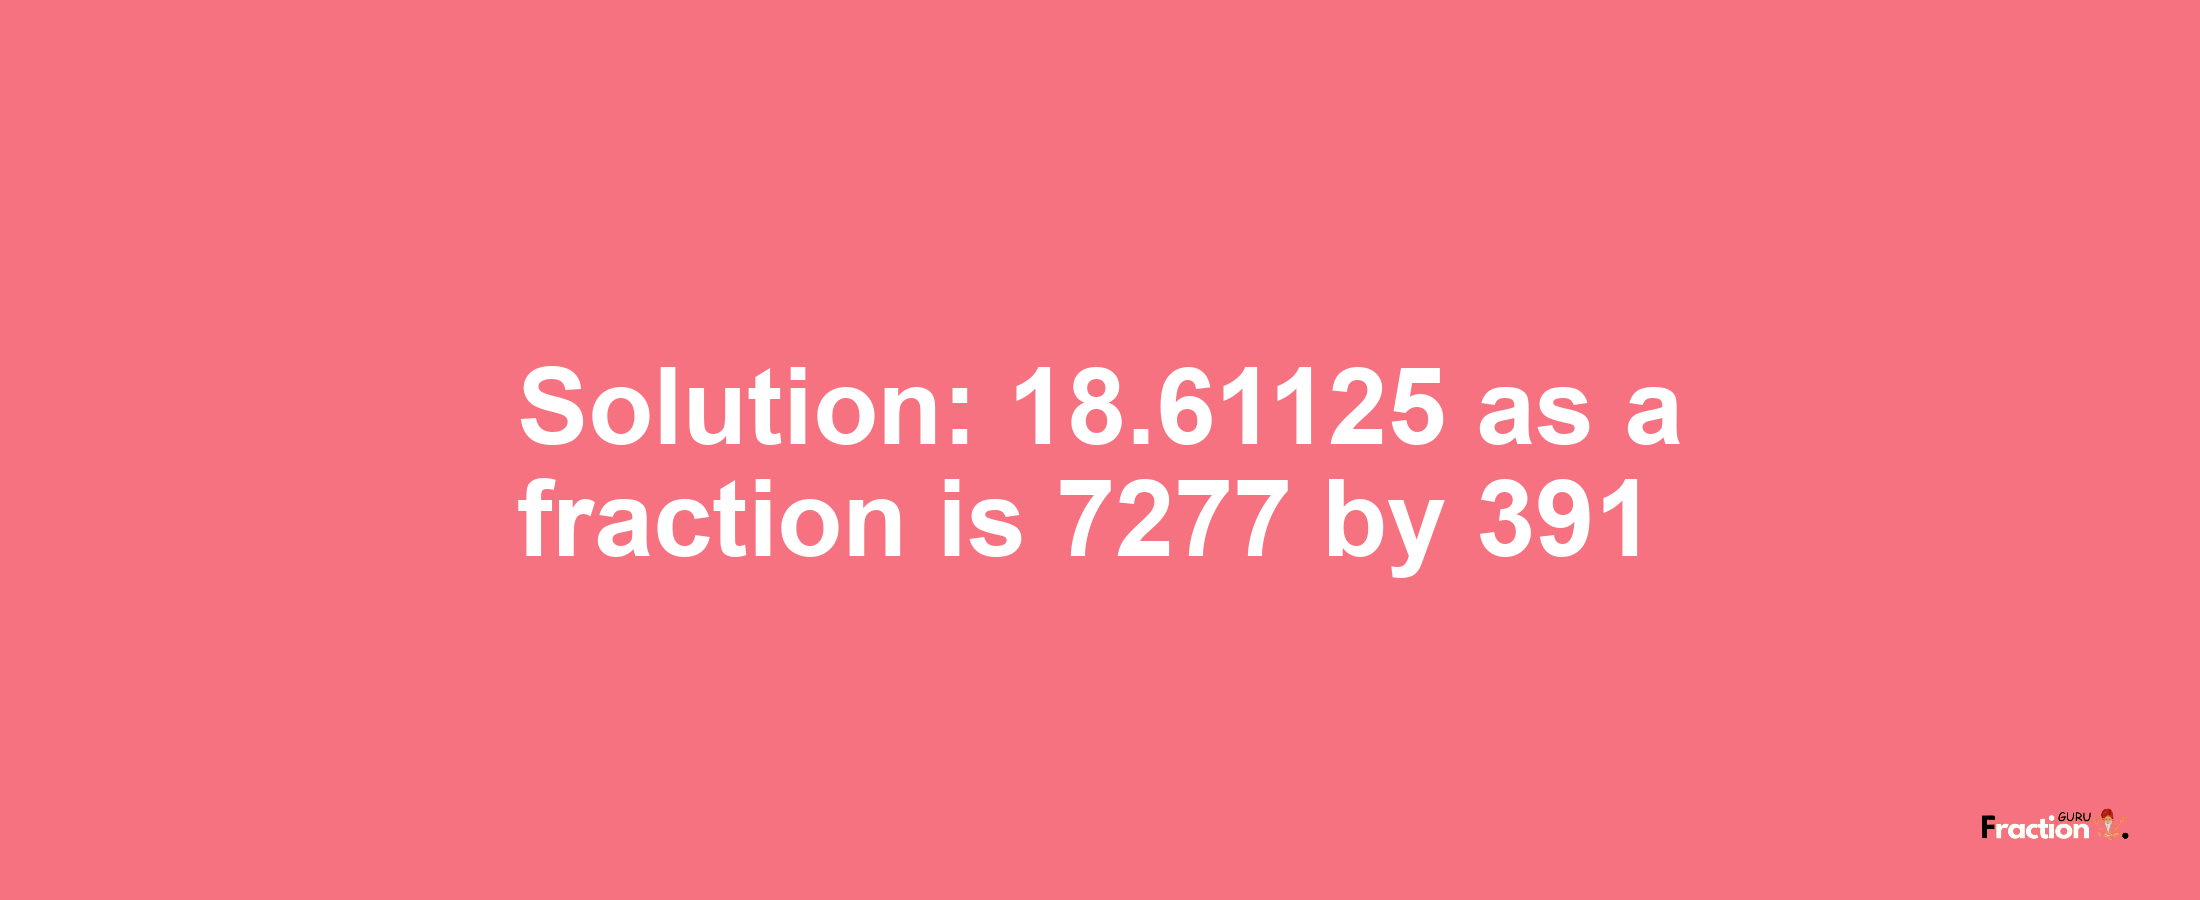 Solution:18.61125 as a fraction is 7277/391